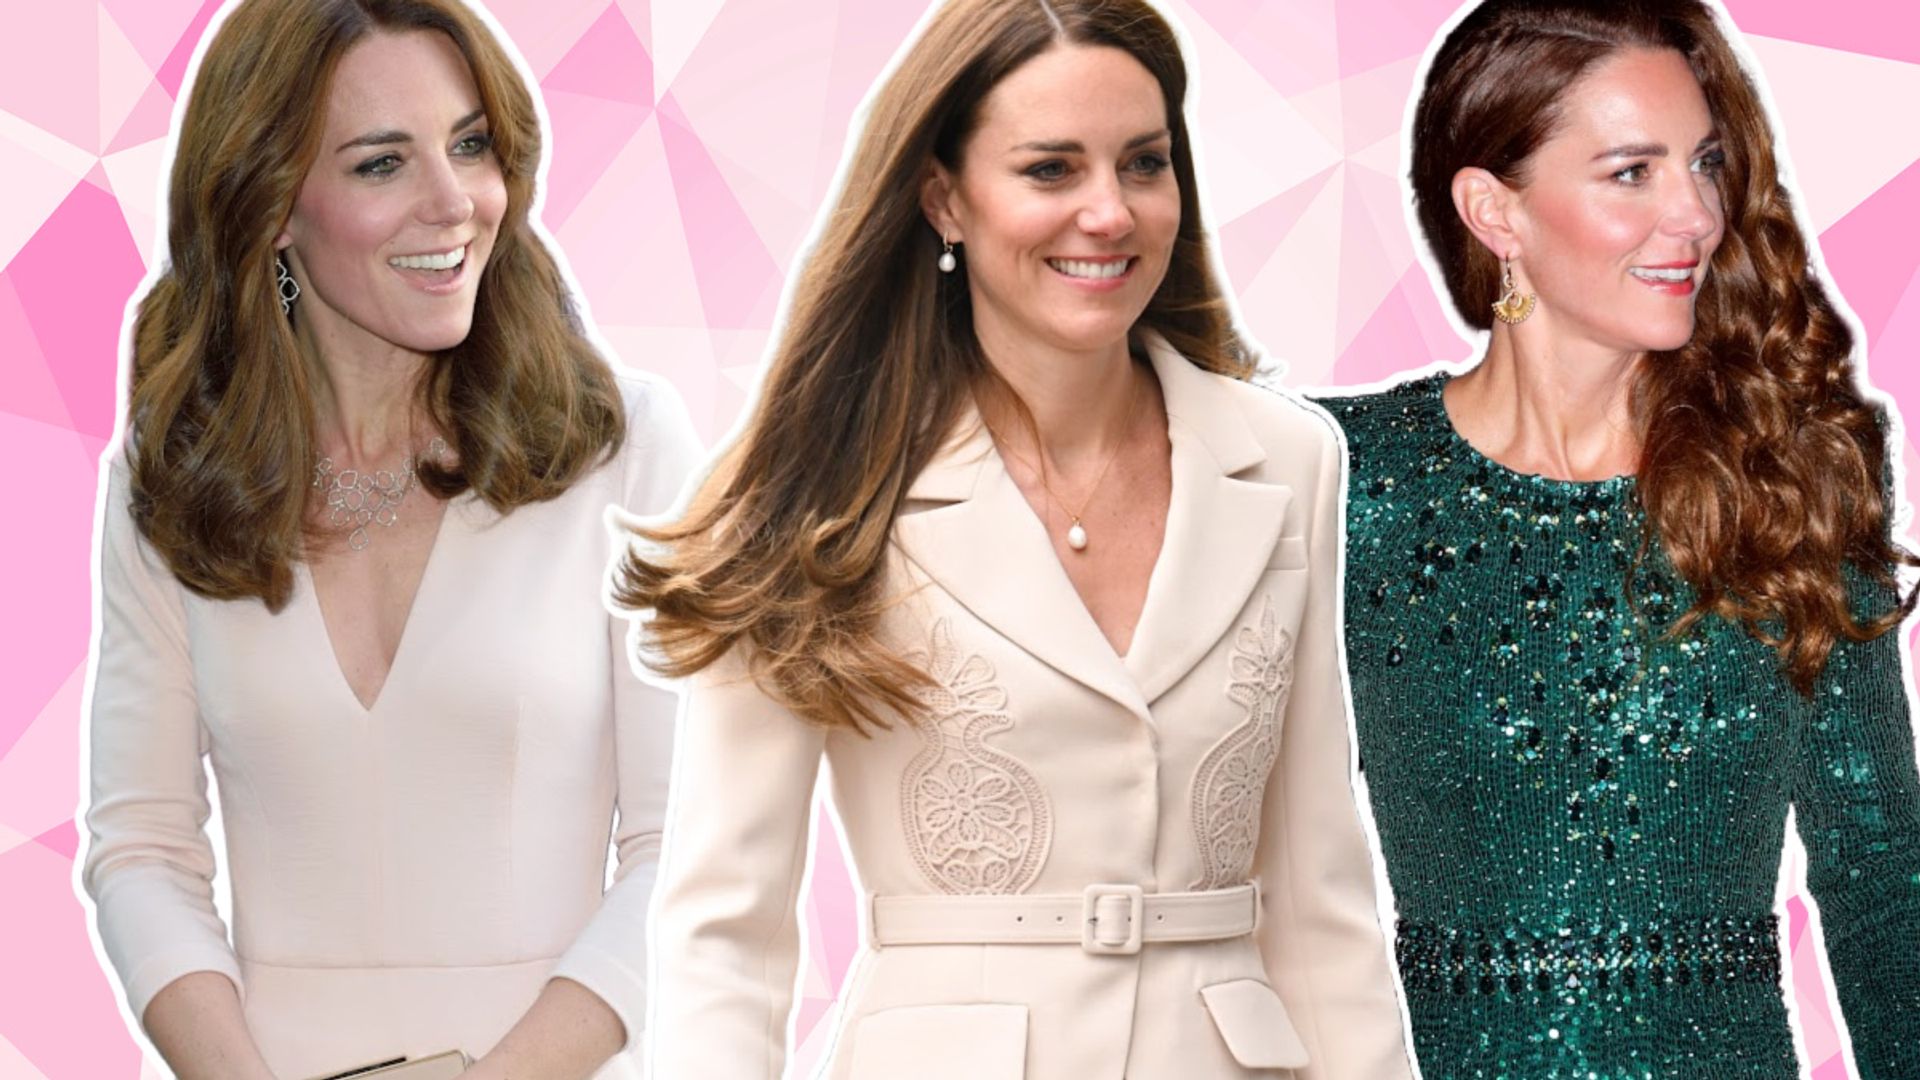 Duchess Kate-Approved Brands in the Nordstrom Half-Yearly Sale